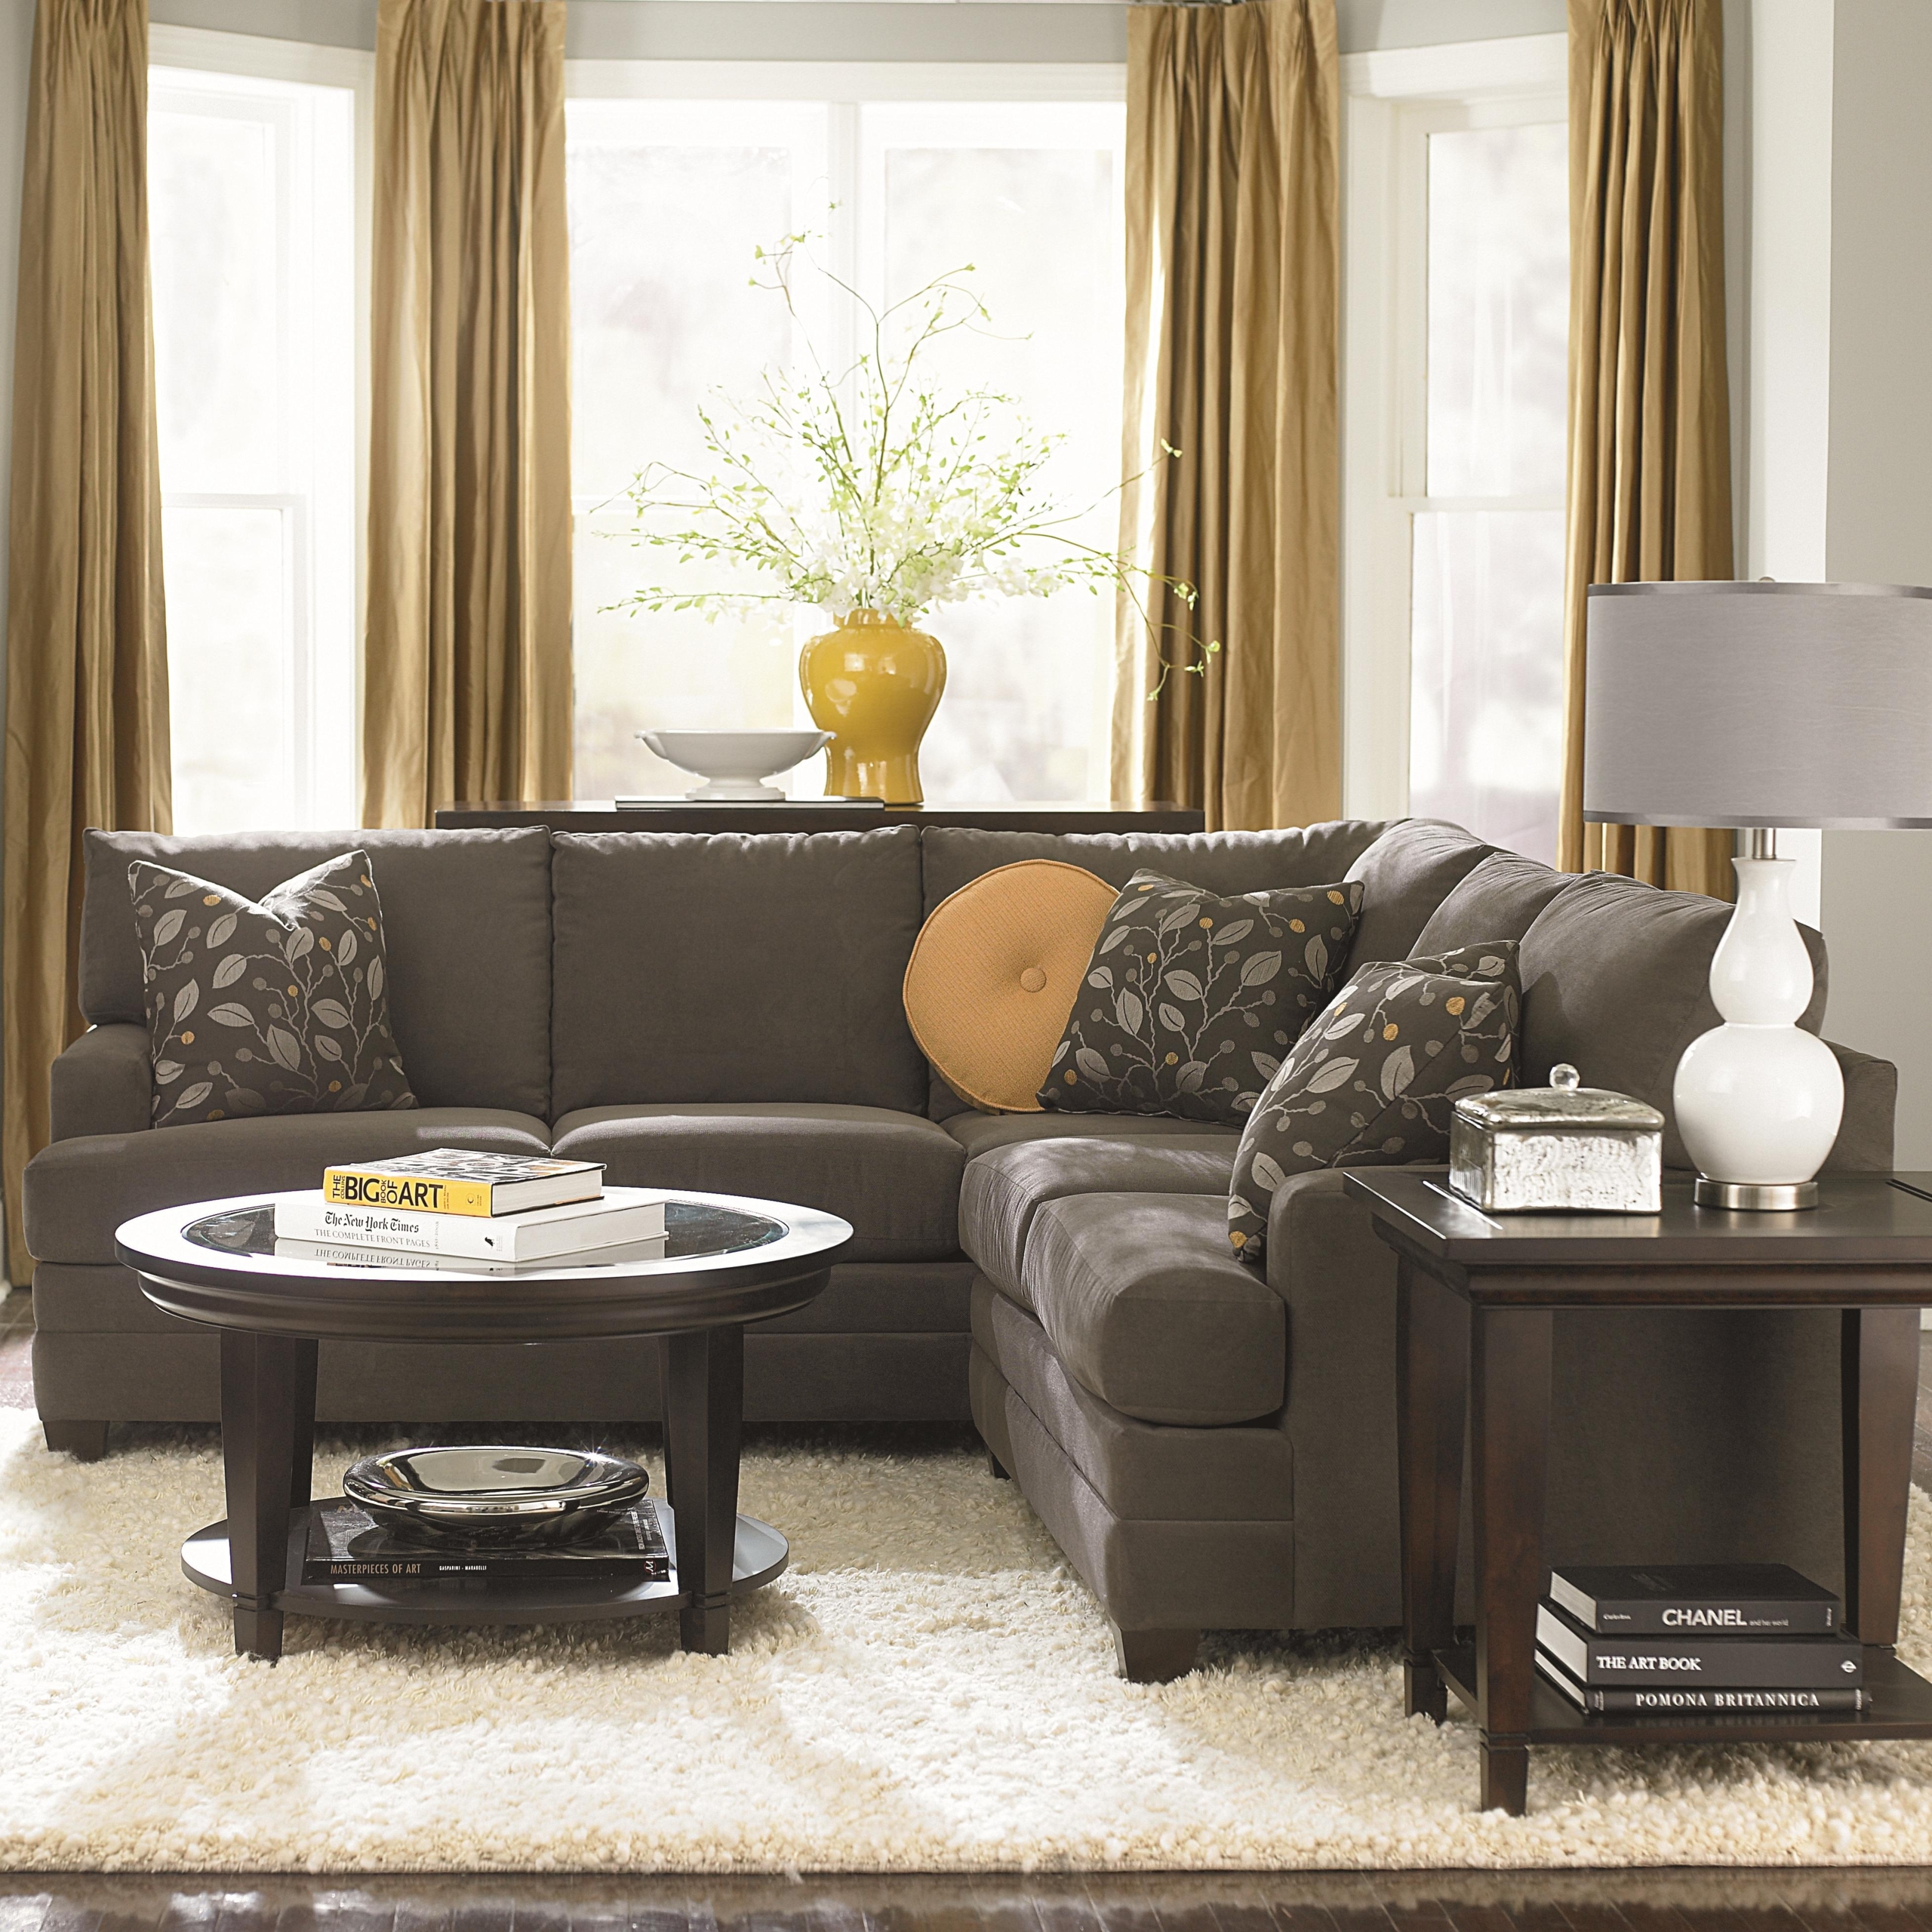 Charcoal grey couch decorating